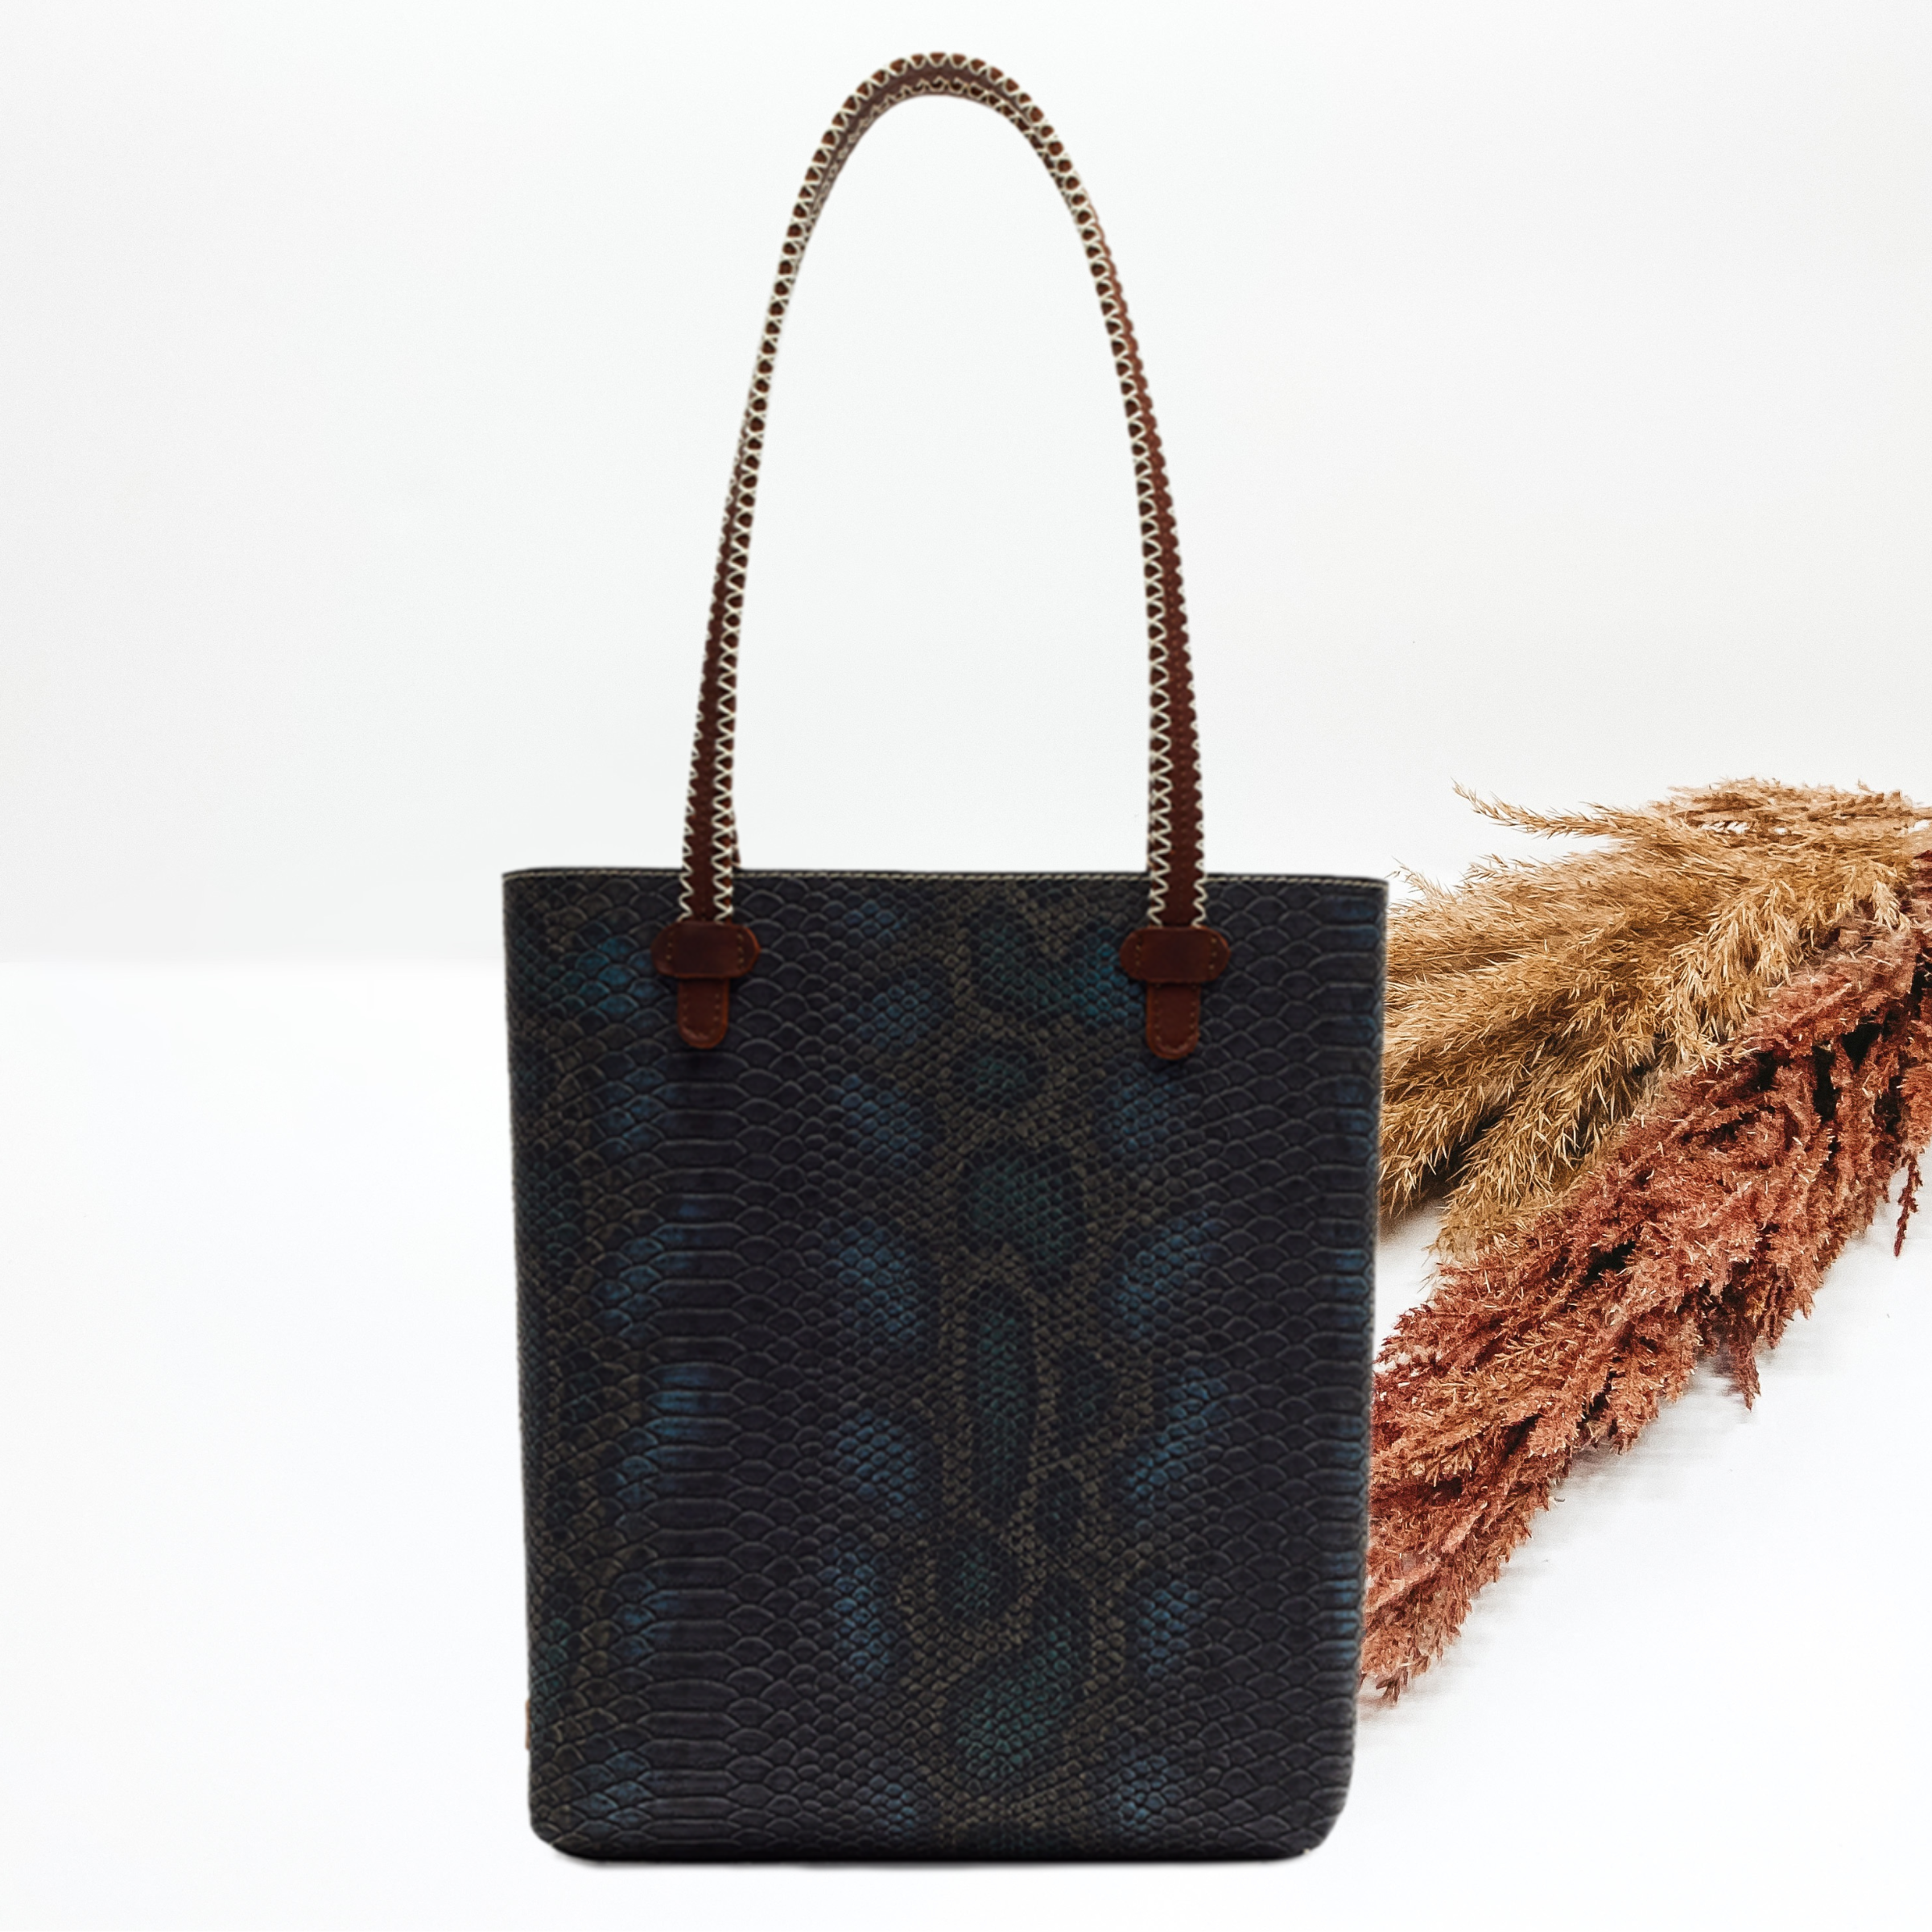 Rectangle tote bag with a dark snake skin print and leather stitched straps. This tote is pictured on a white background with pompous grass behind the tote. 